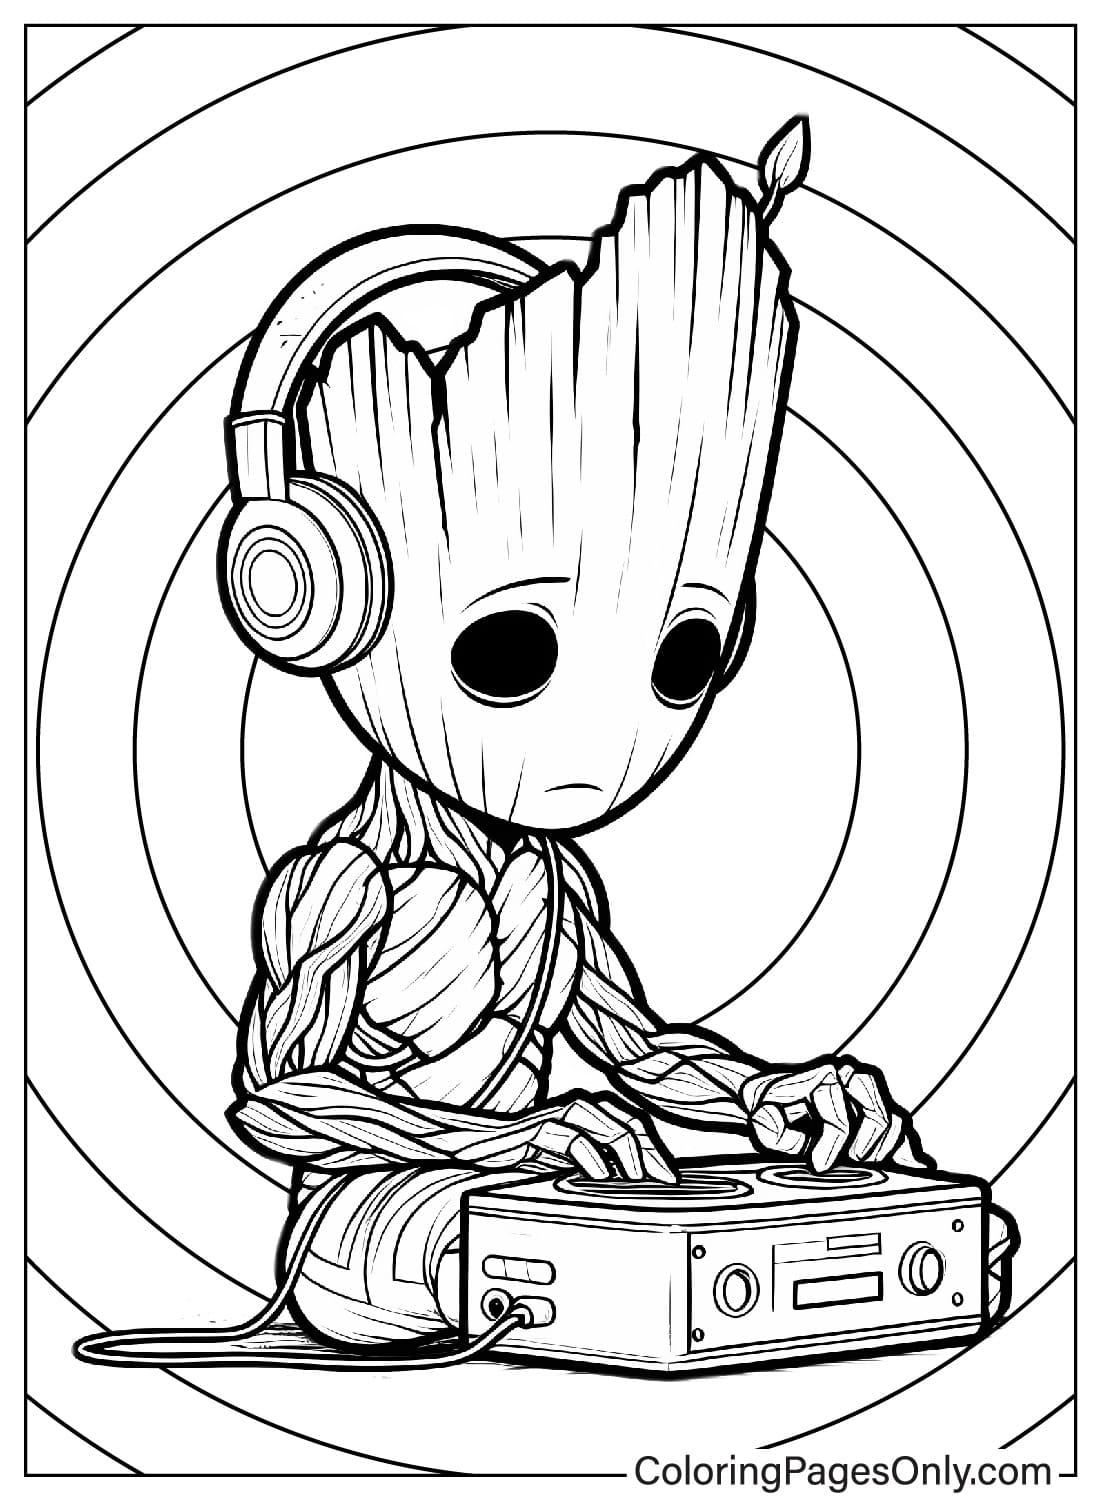 Marvelous Groot Coloring Page from Groot